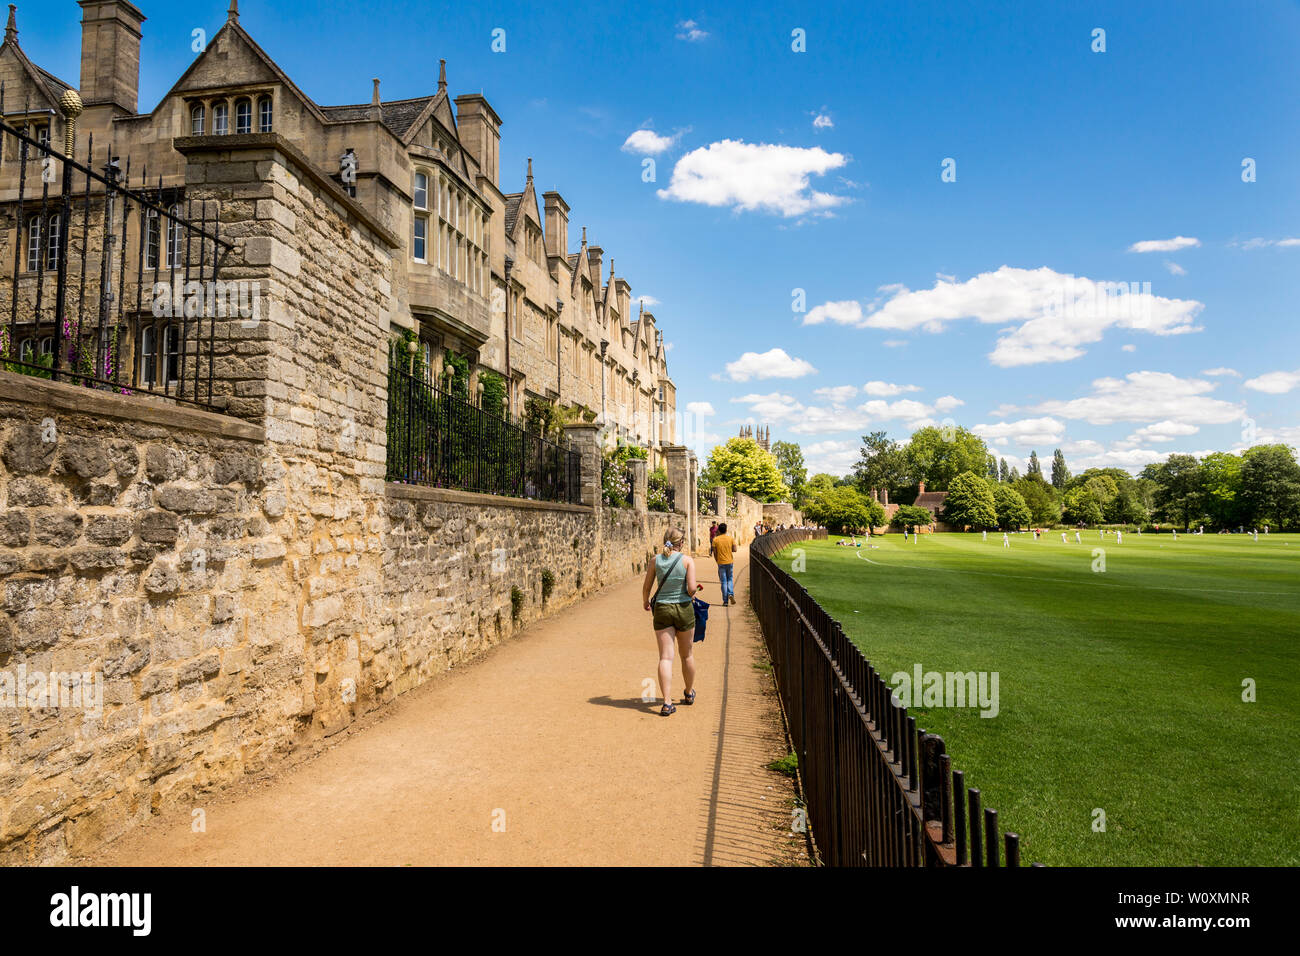 The back of Merton College sunlit under a blue sky with white clouds on a beautiful summer's day in the famous university town of Oxford. Stock Photo